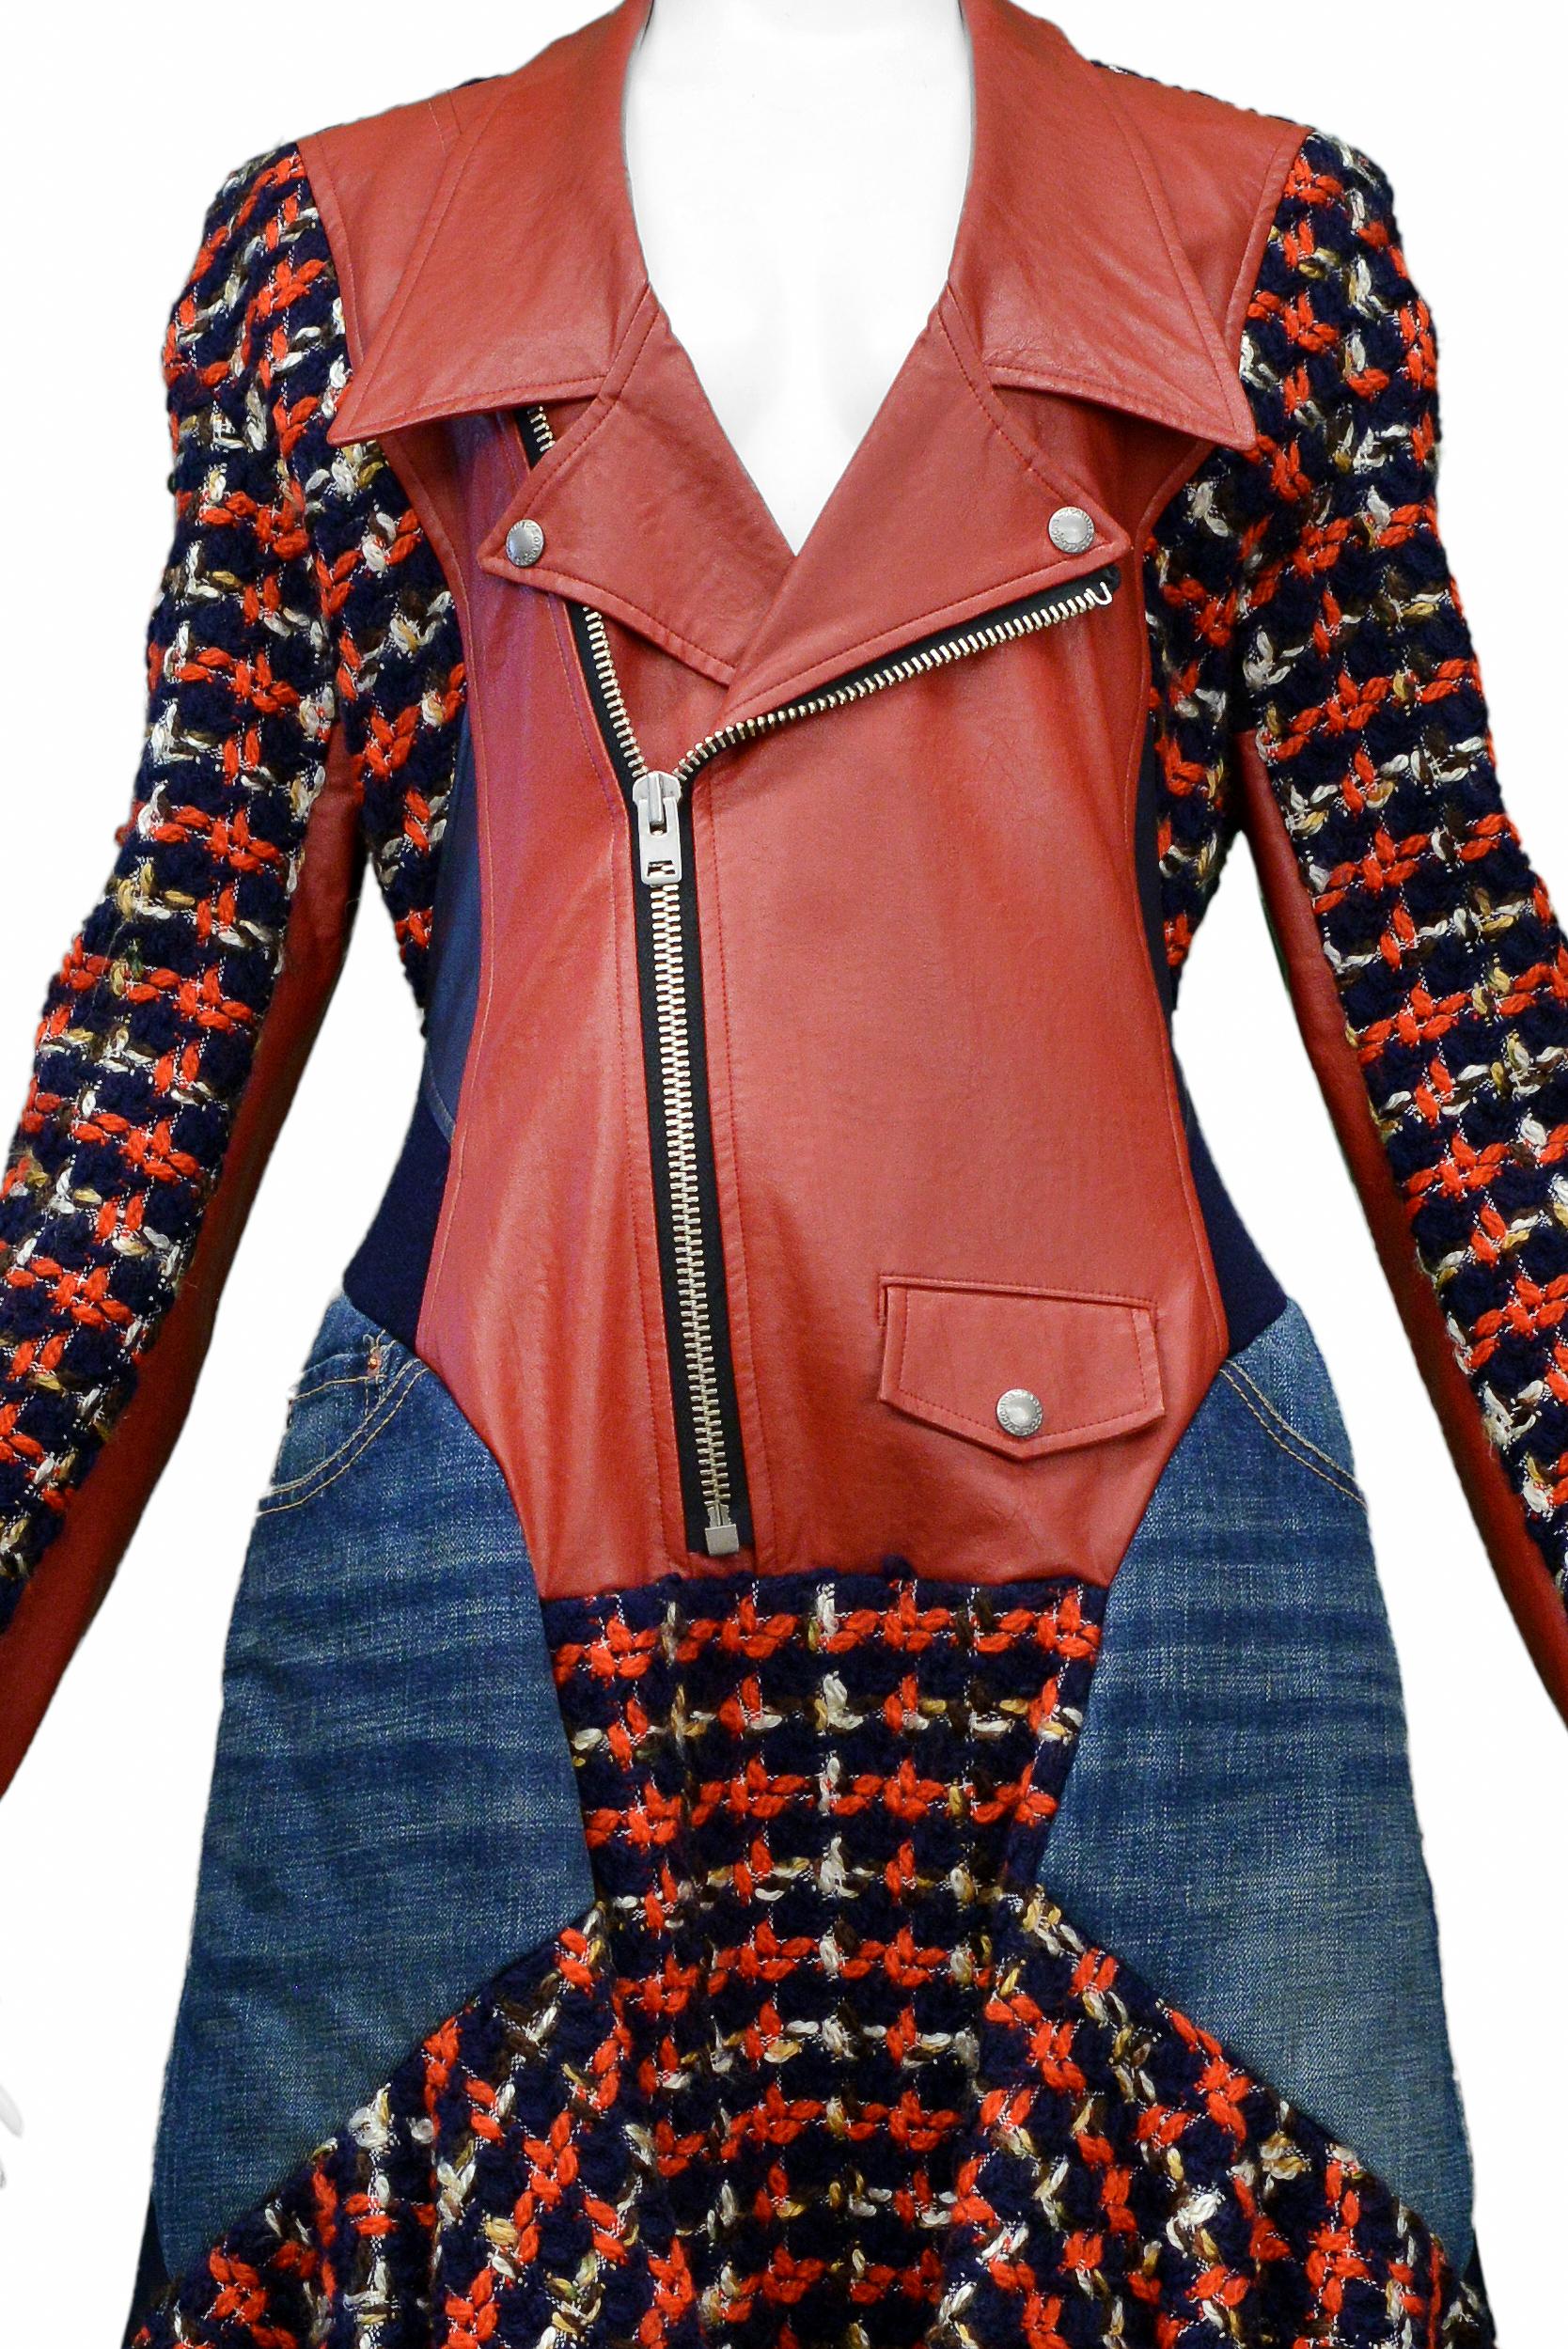 Junya Watanabe Red Leather Moto Jacket With Denim & Boucle Insets 2013 In Excellent Condition For Sale In Los Angeles, CA